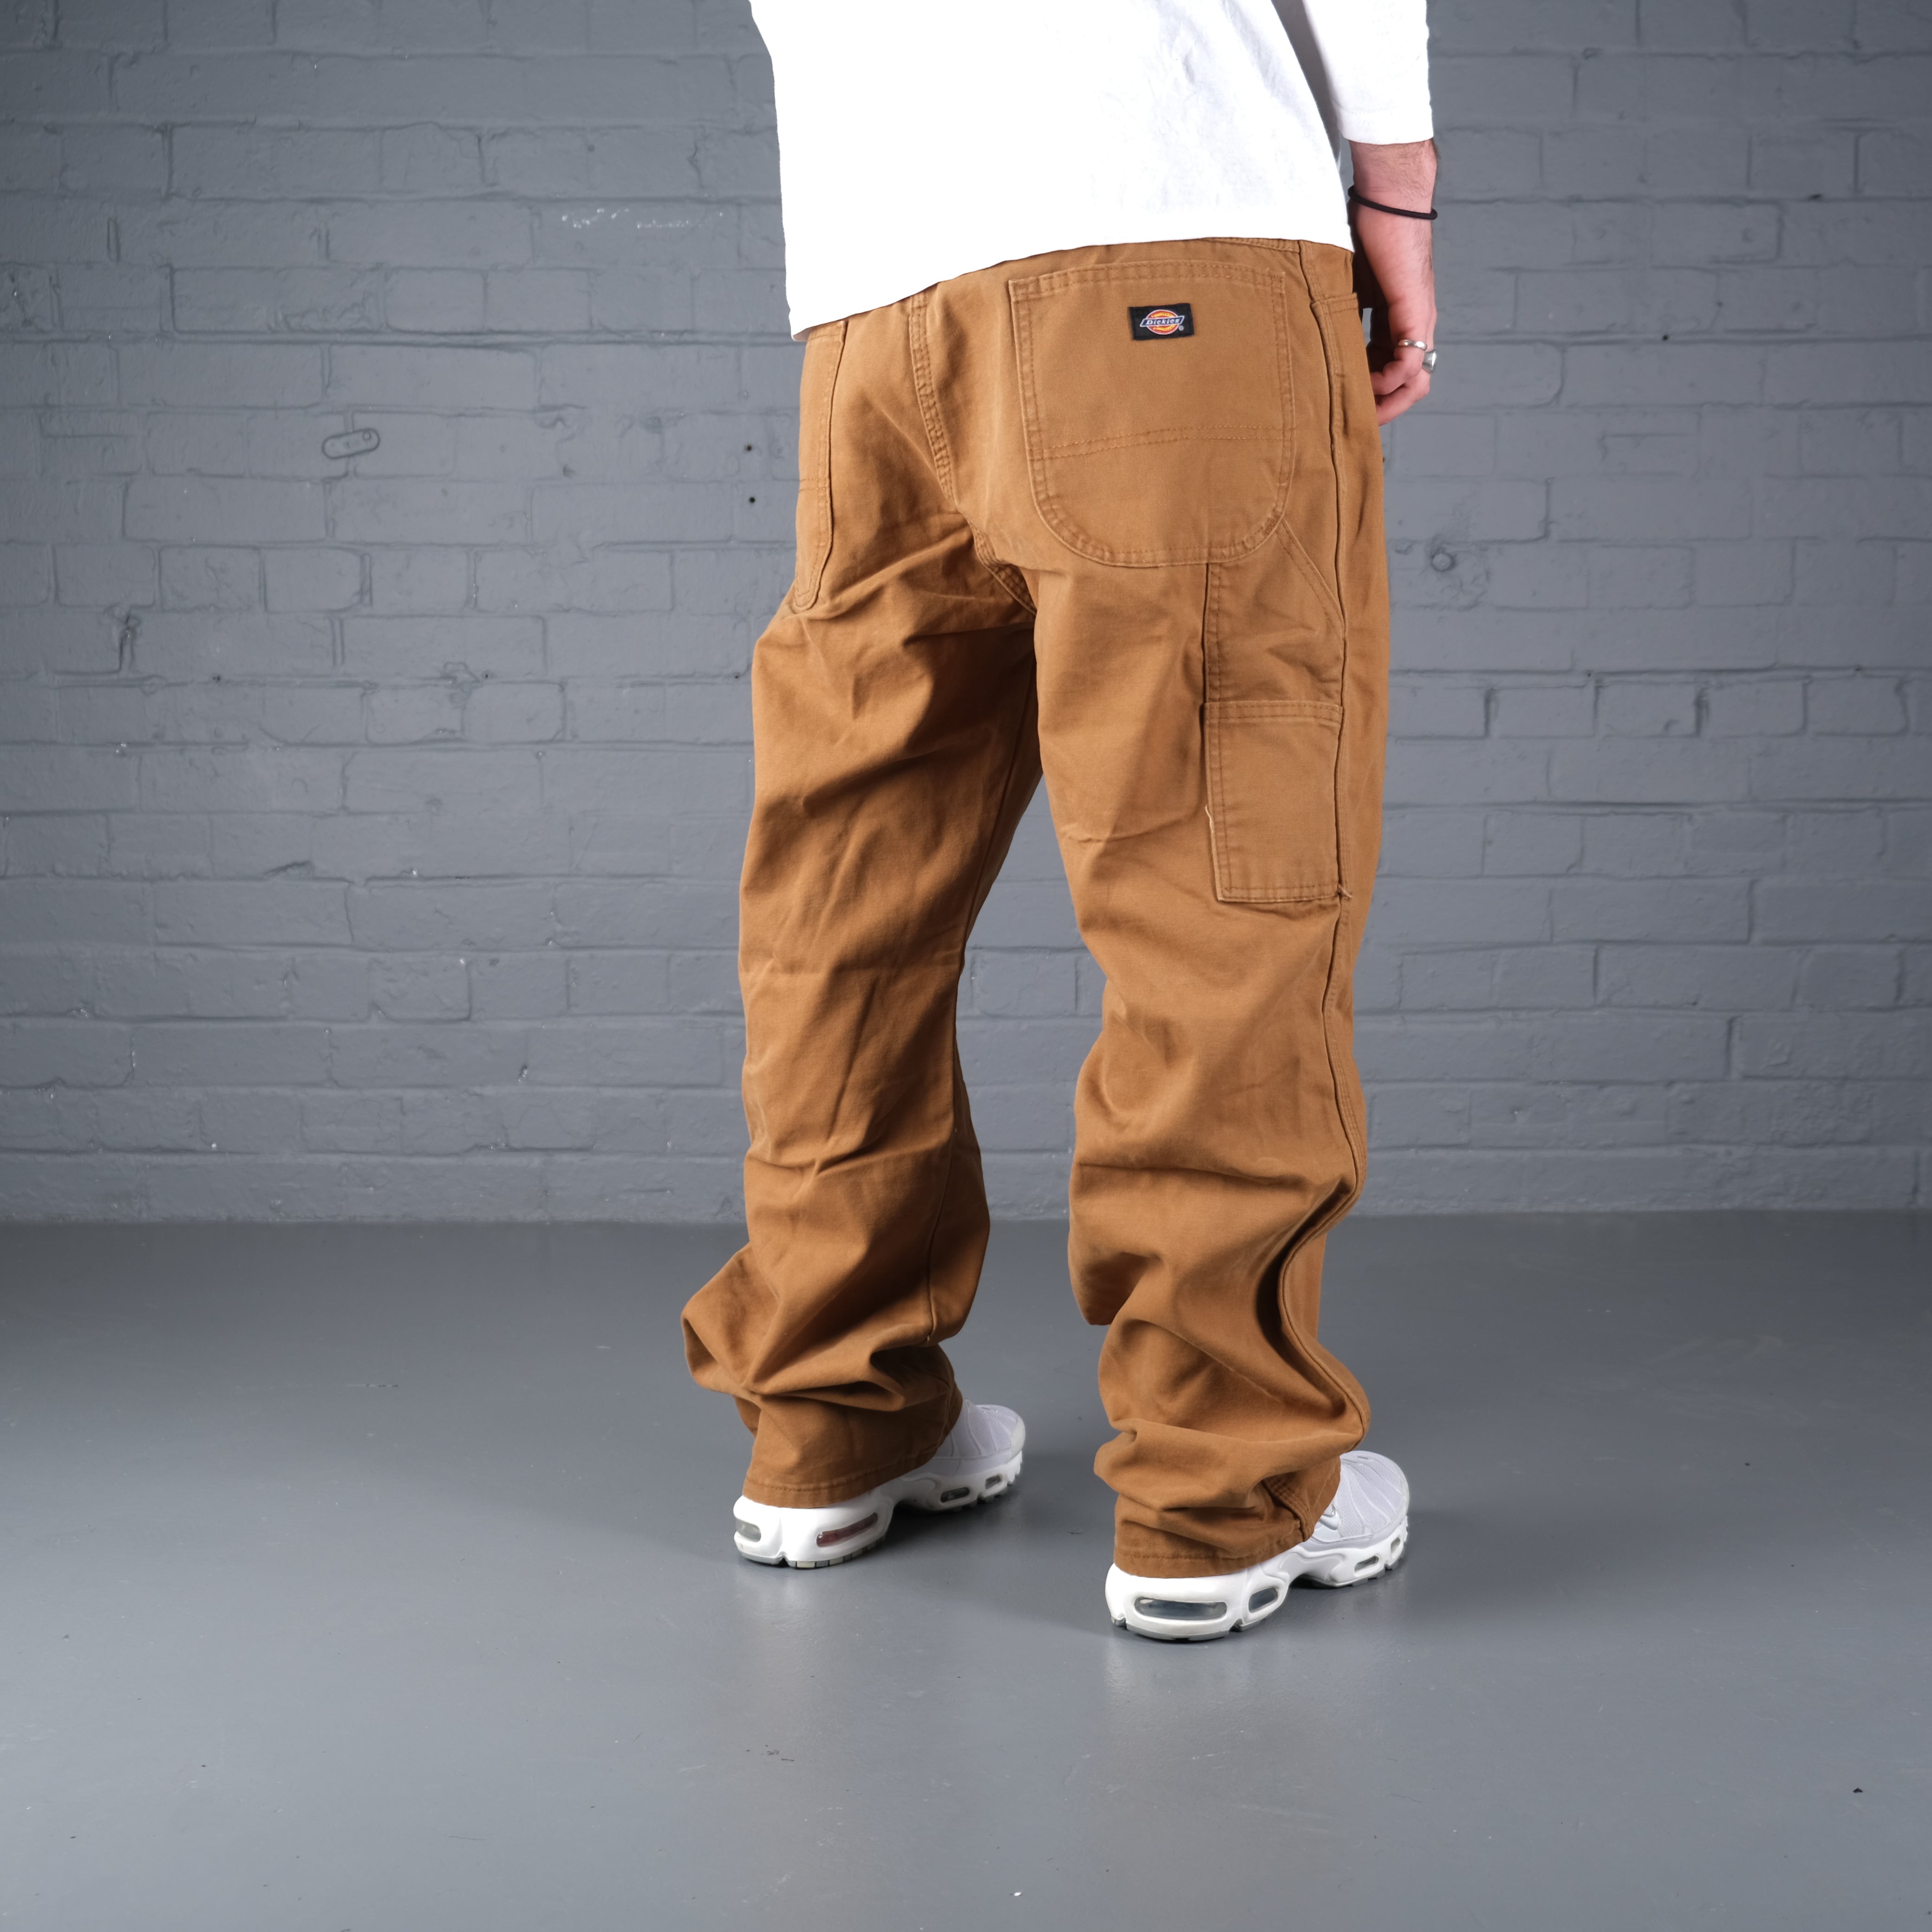 Vintage Dickies Jeans in Tan. – thebreadandbuttercollection